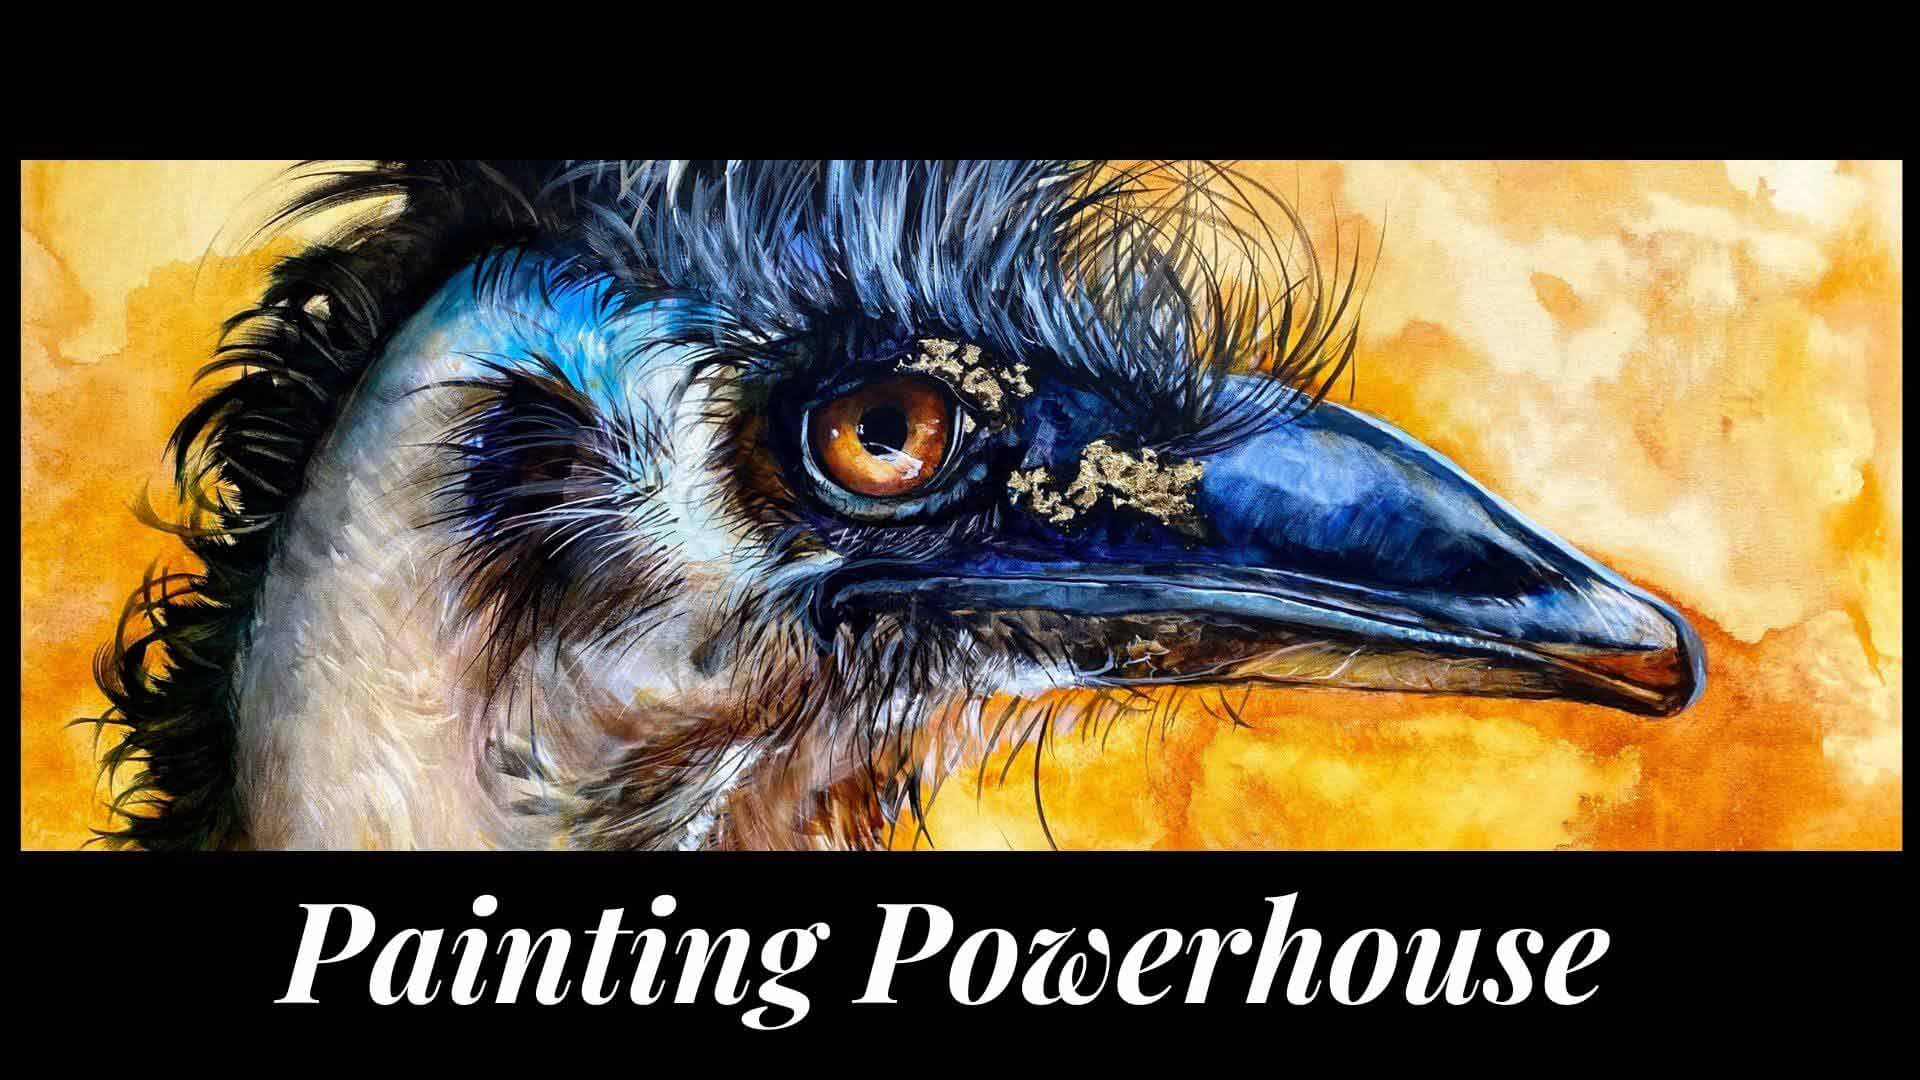 Painting Powerhouse online course